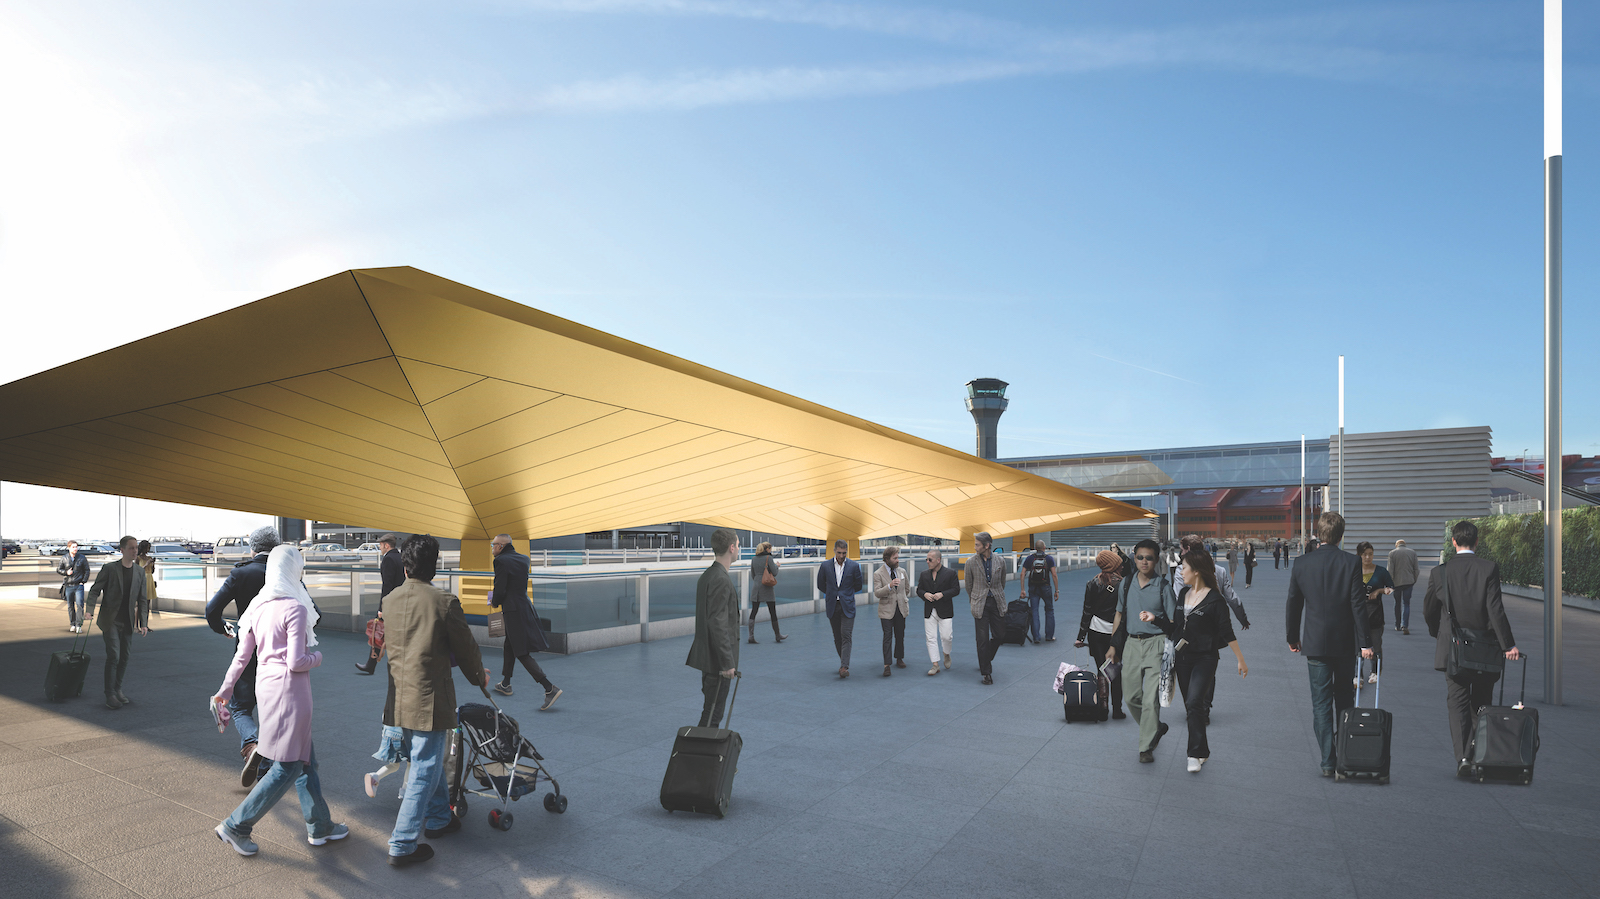 Visualisation of the parasol roof of the Central Terminal station